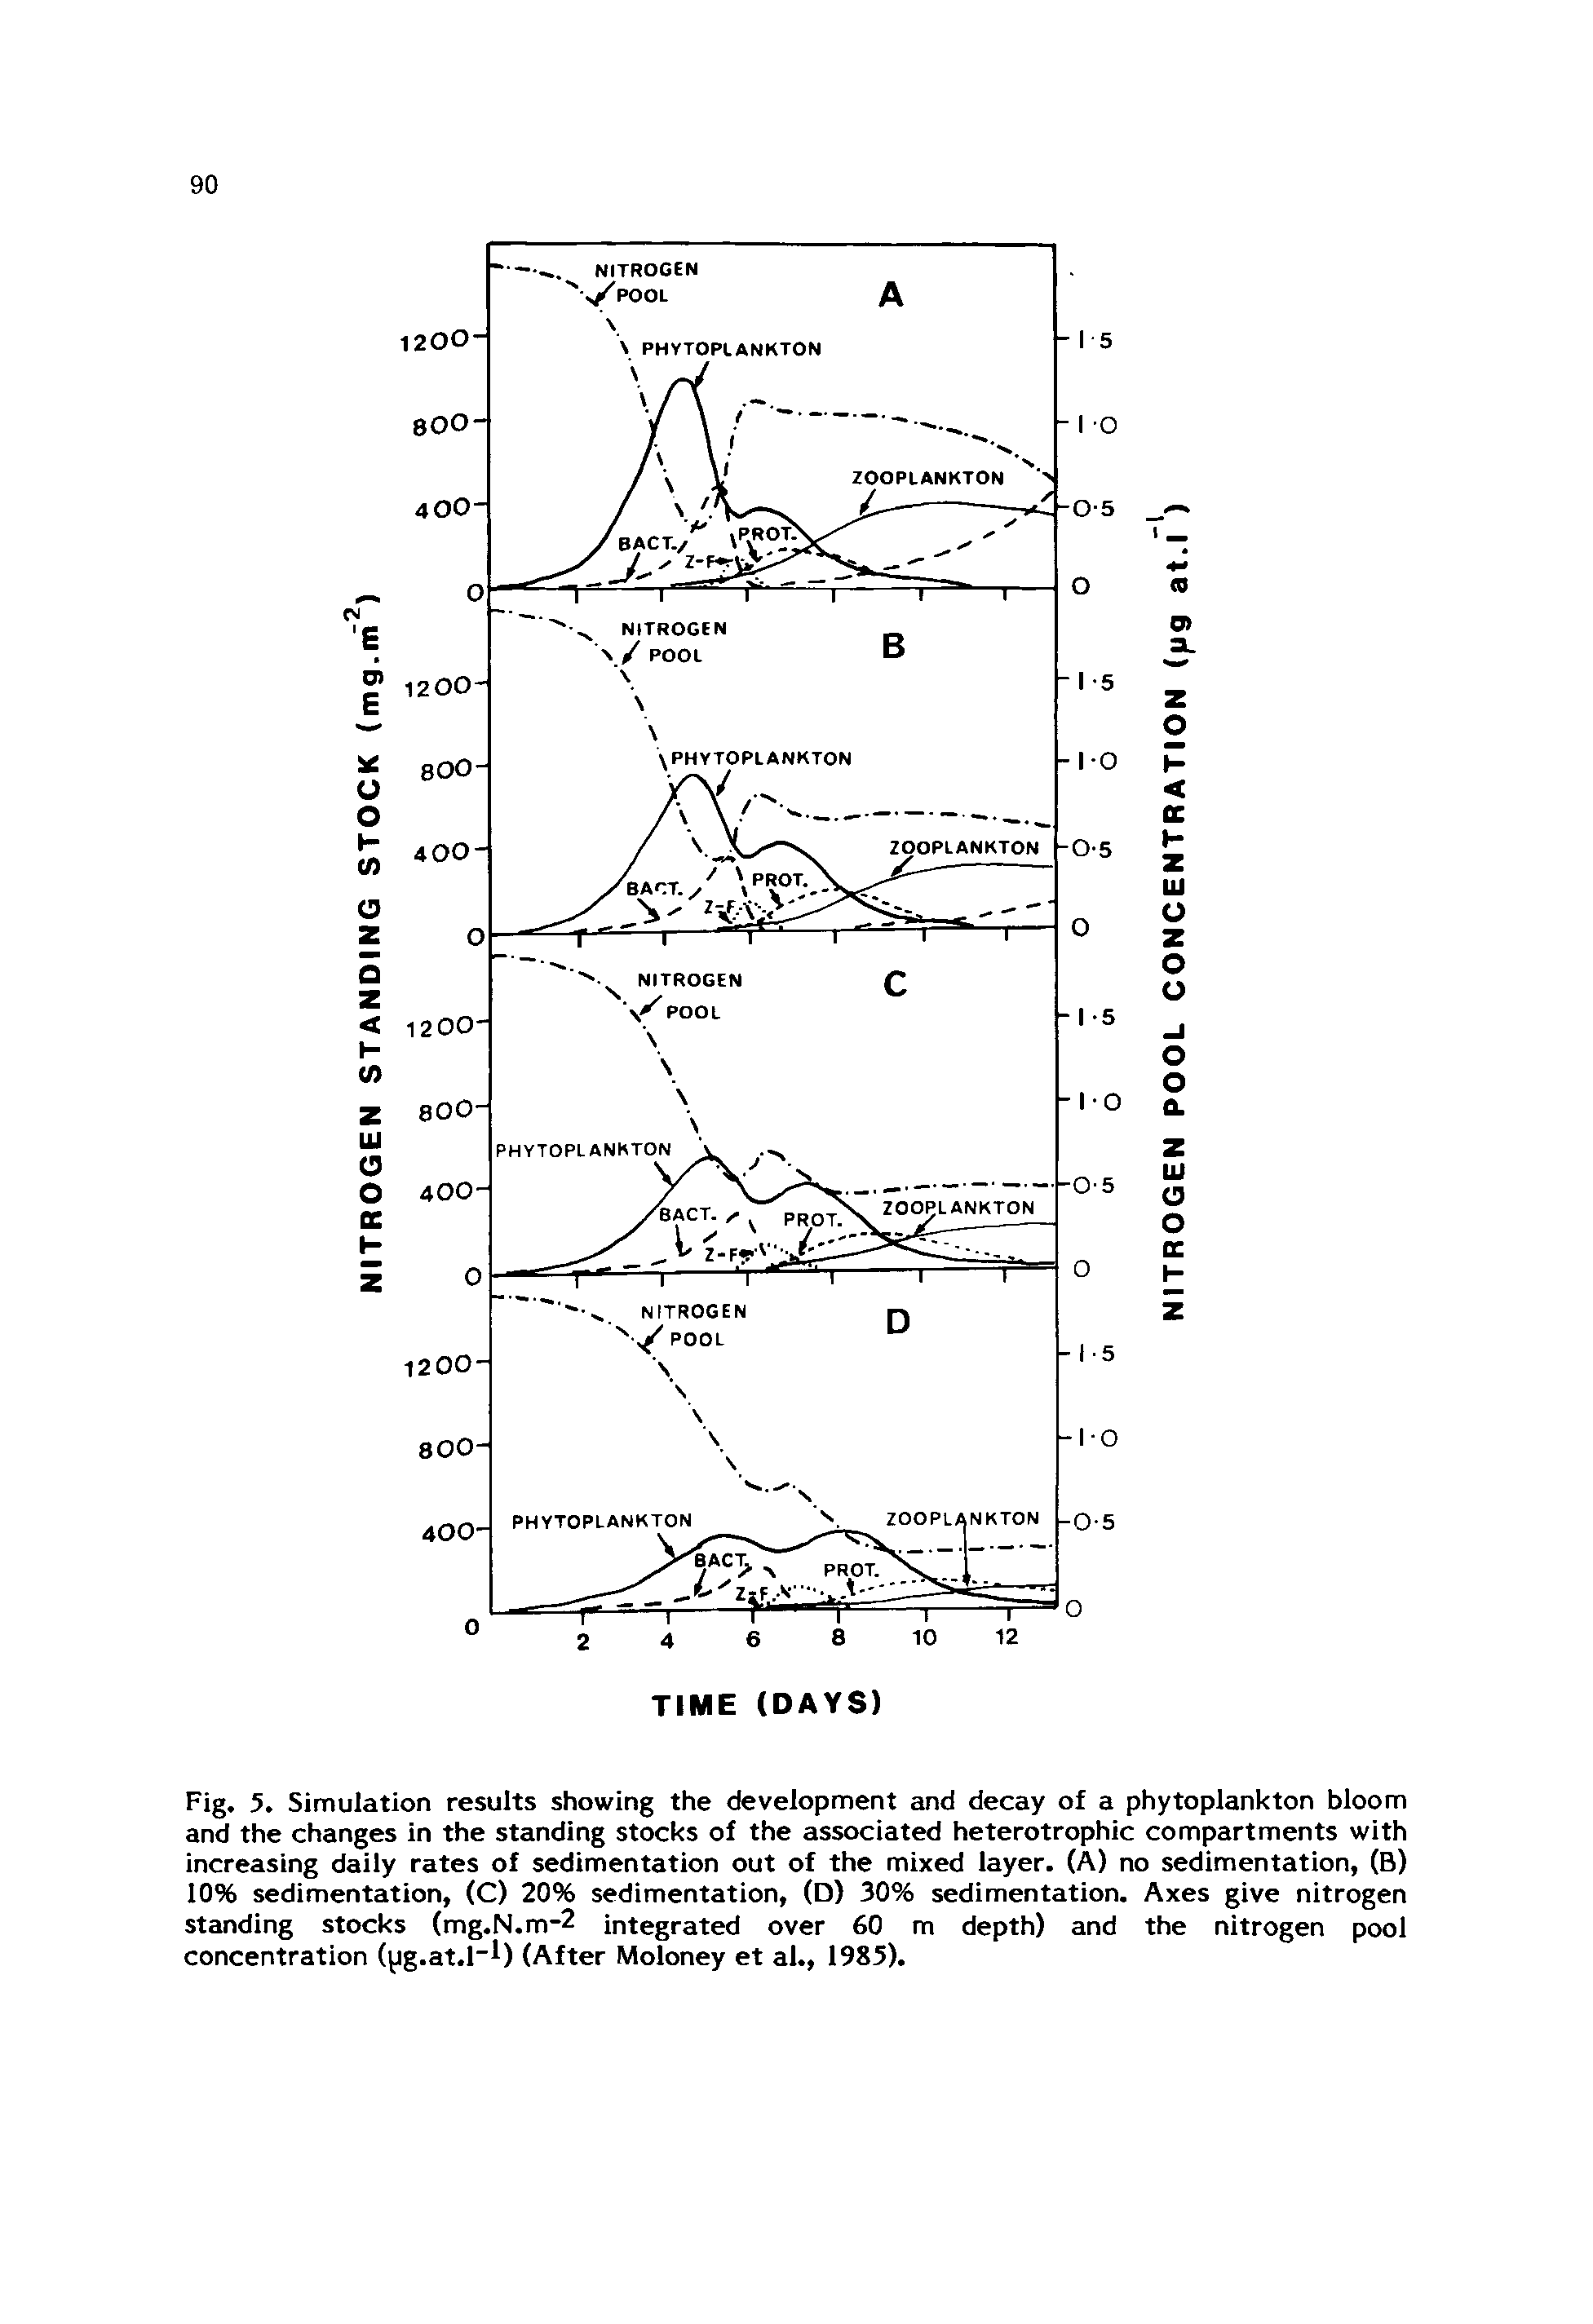 Fig. 5. Simulation results showing the development and decay of a phytoplankton bloom and the changes in the standing stocks of the associated heterotrophic compartments with increasing daily rates of sedimentation out of the mixed layer. (A) no sedimentation, (B) 10% sedimentation, (C) 20% sedimentation, (D) 30% sedimentation. Axes give nitrogen standing stocks (mg.N.m-2 integrated over 60 m depth) and the nitrogen pool concentration (pg.at.l- ) (After Moloney et al., 1985).